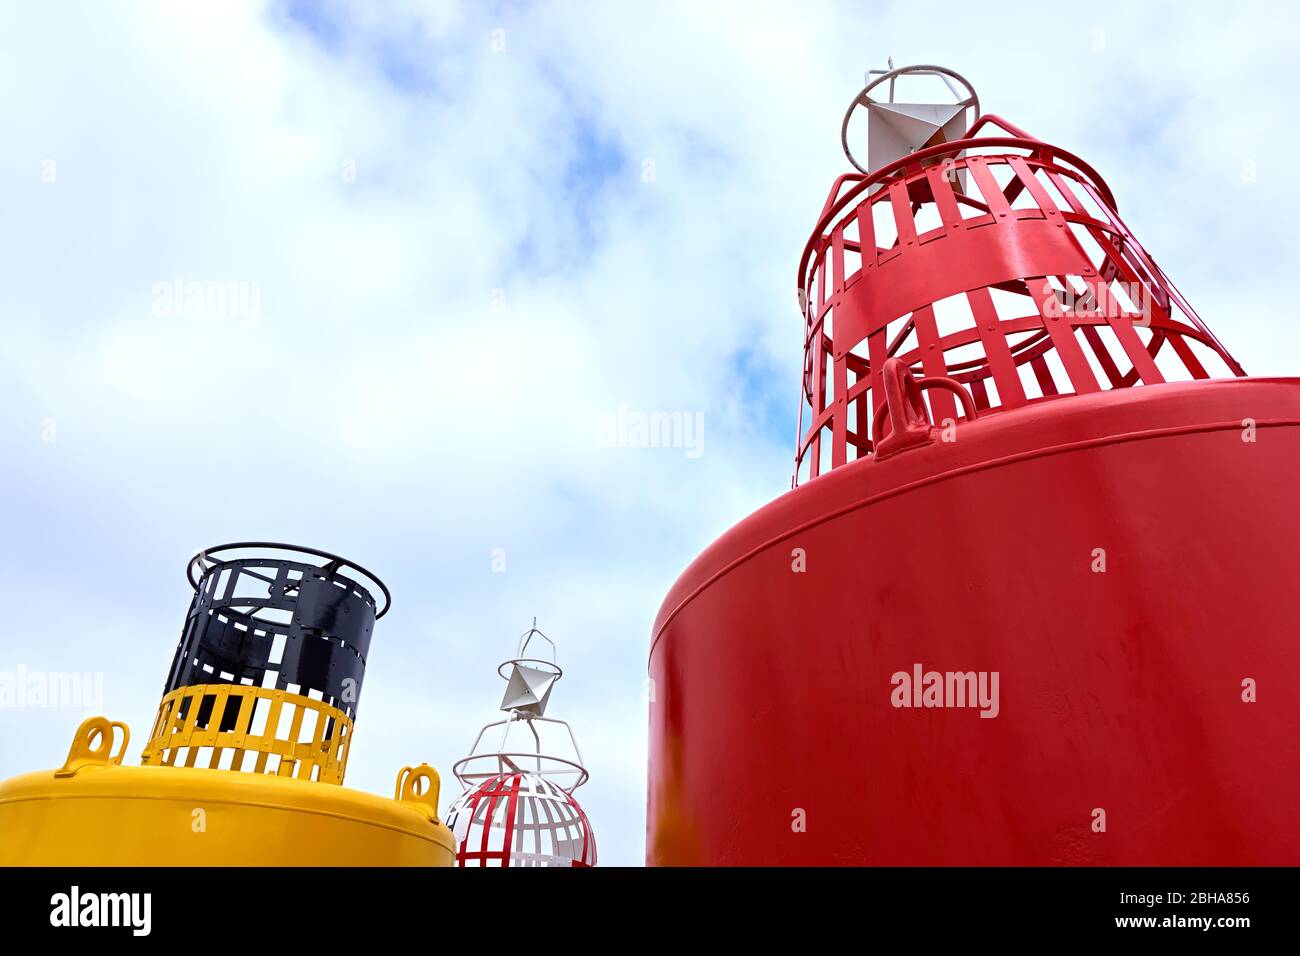 Large red and yellow buoy against a blue cloudy sky with copy space Stock Photo